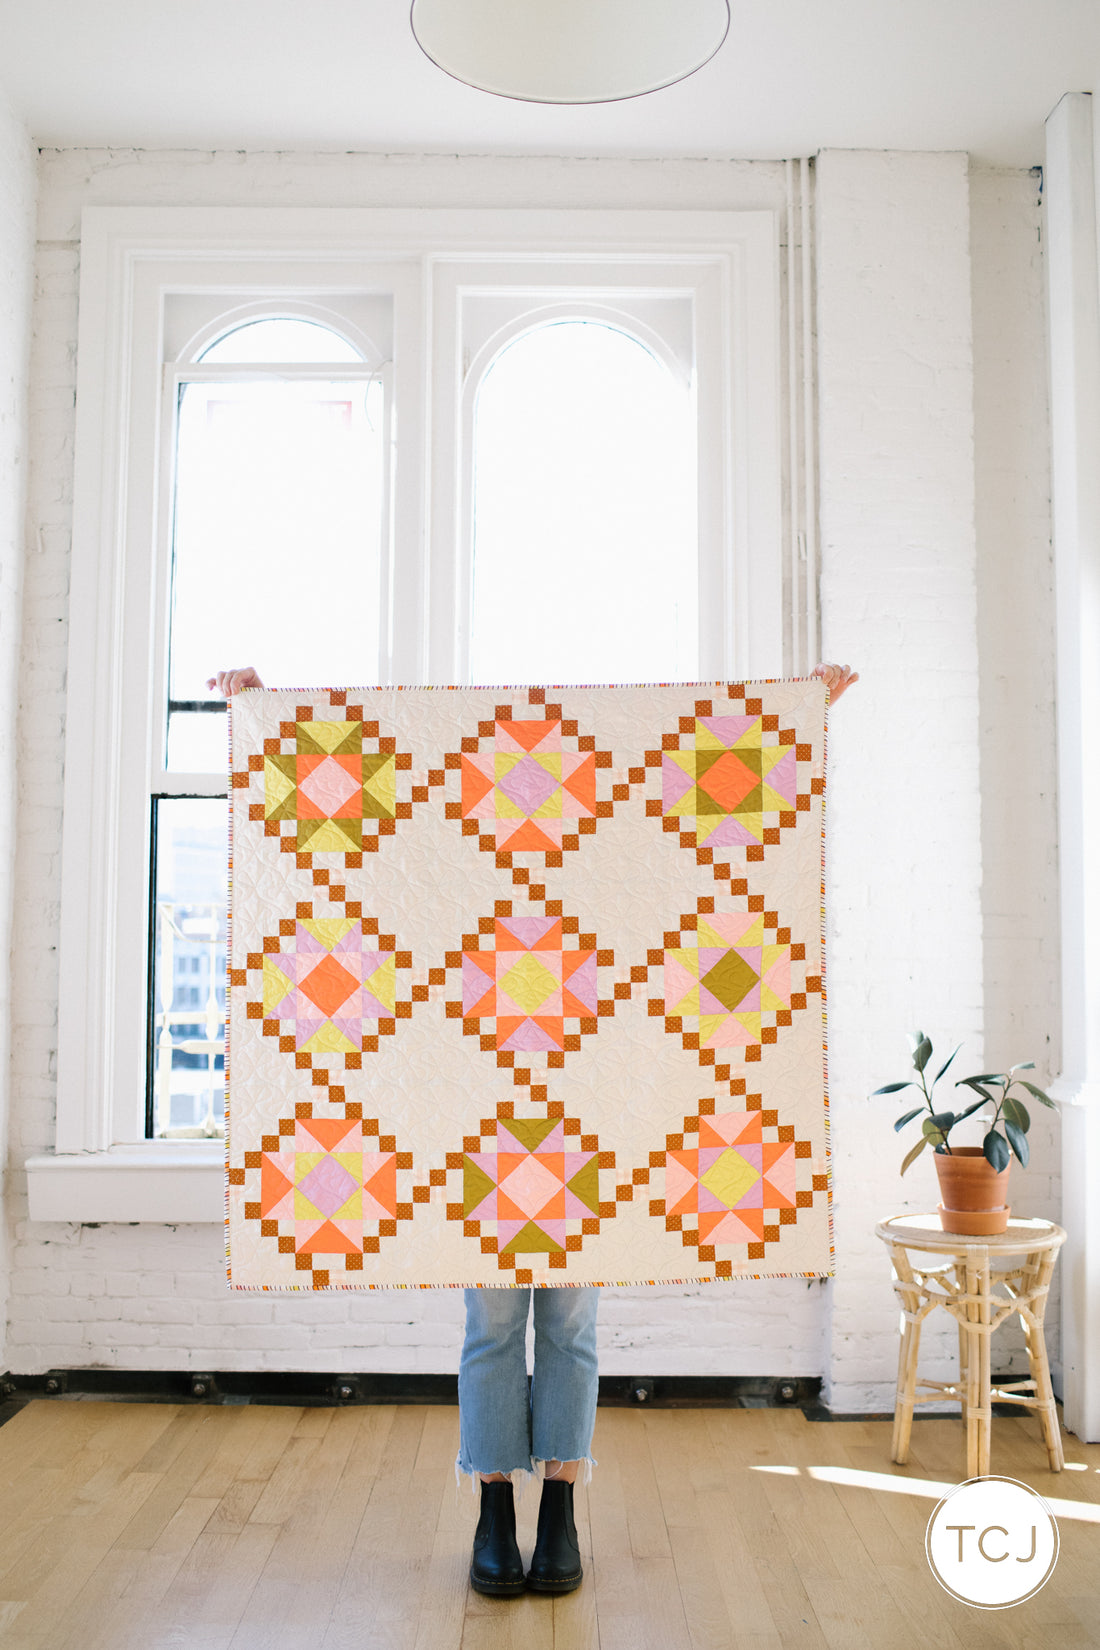 Champagne Quilt - the Test Quilt